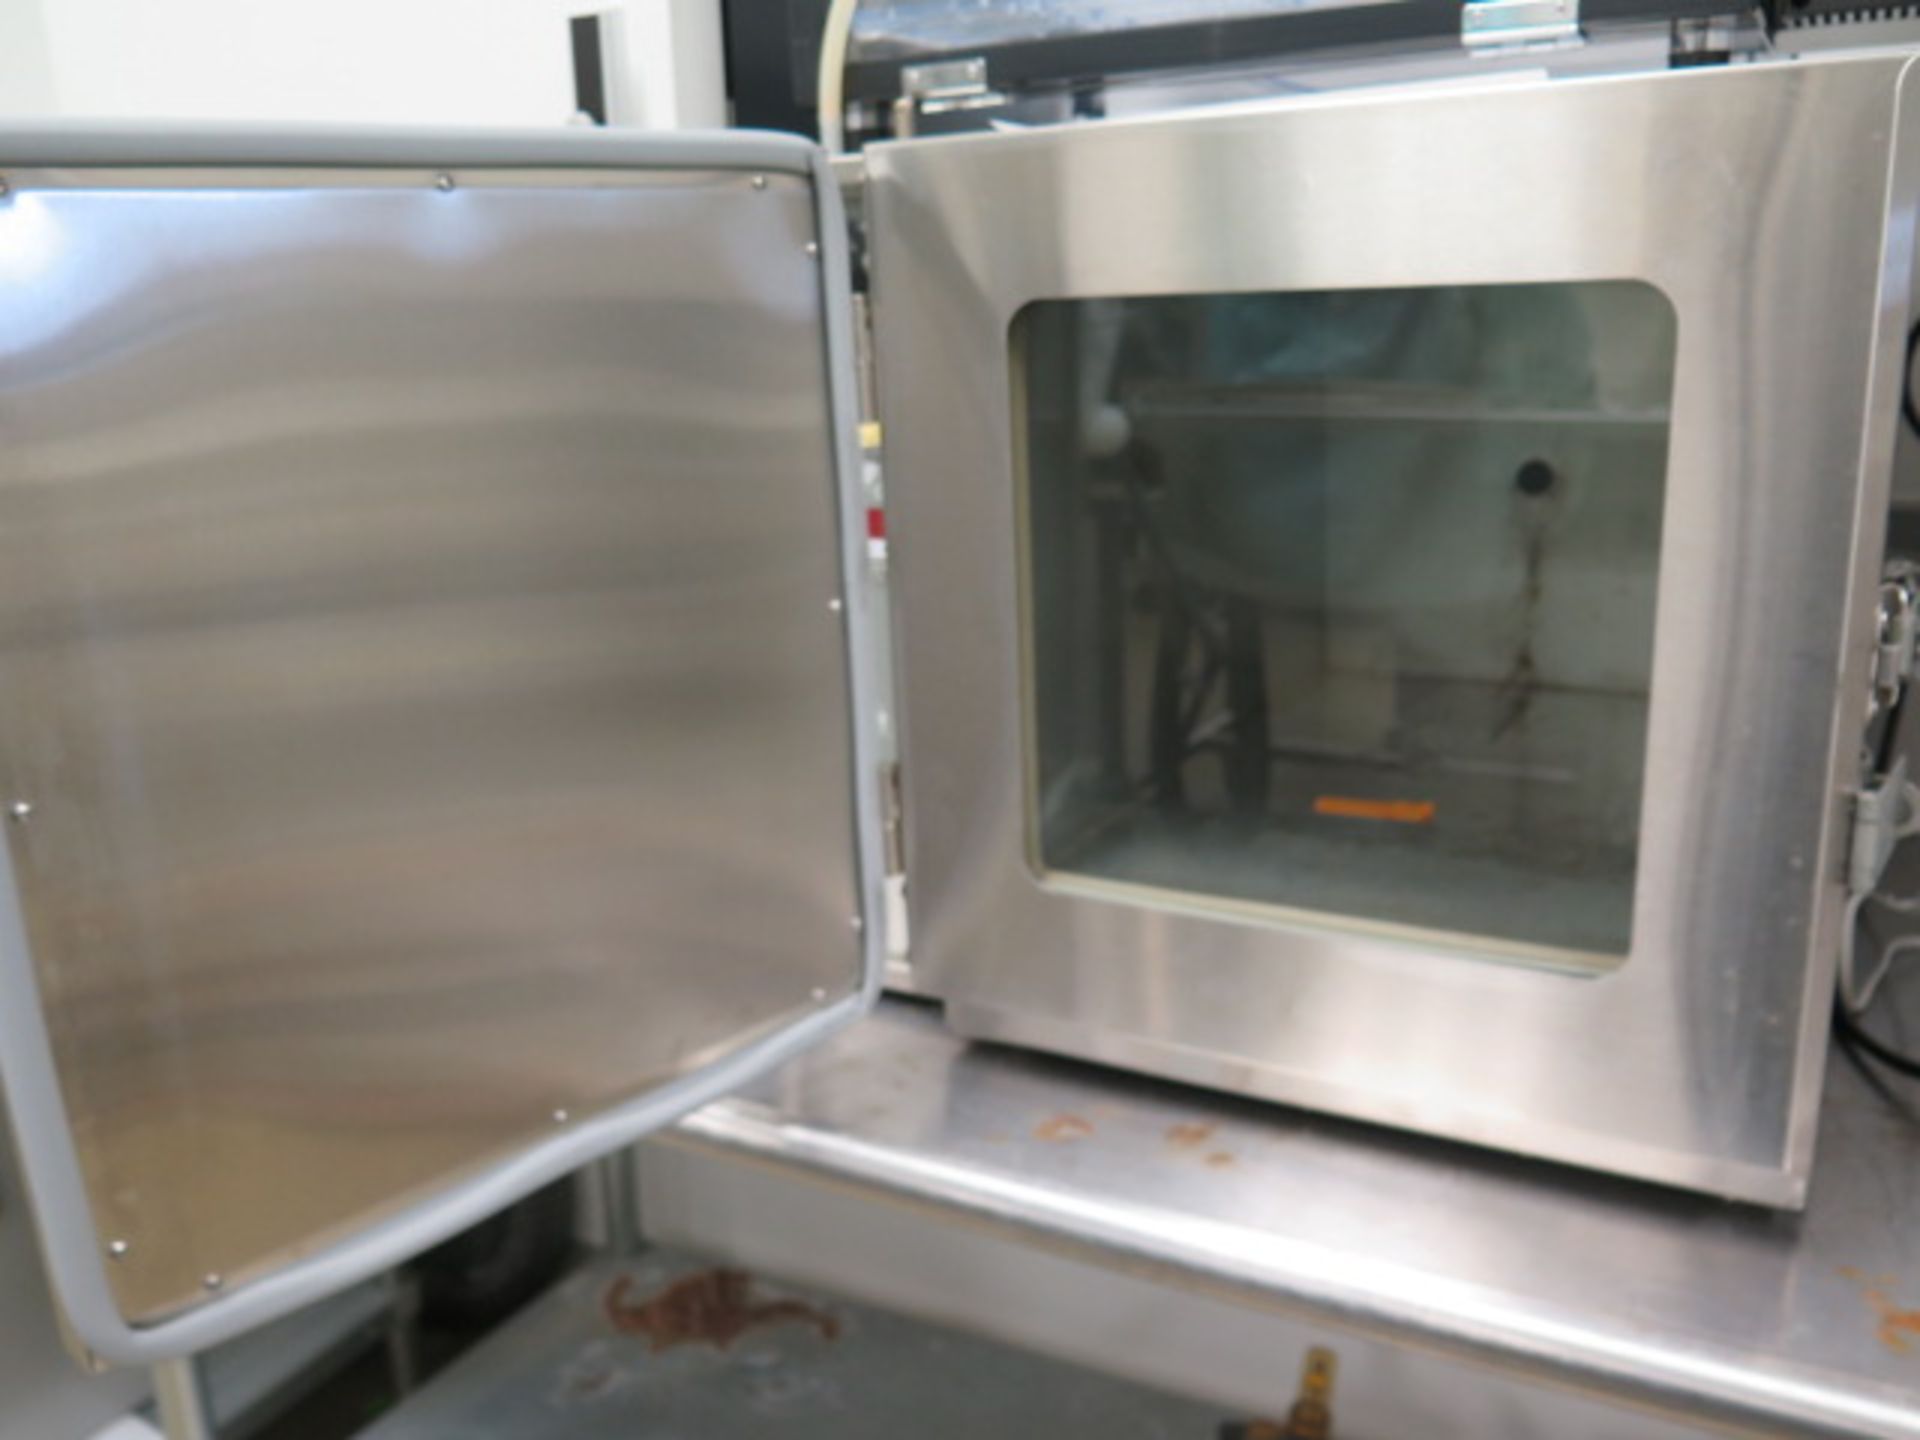 VWR mdl. 1430M Vacuum Oven s/n 1201098 60-105 Degrees C (SOLD AS-IS - NO WARRANTY) - Image 4 of 10